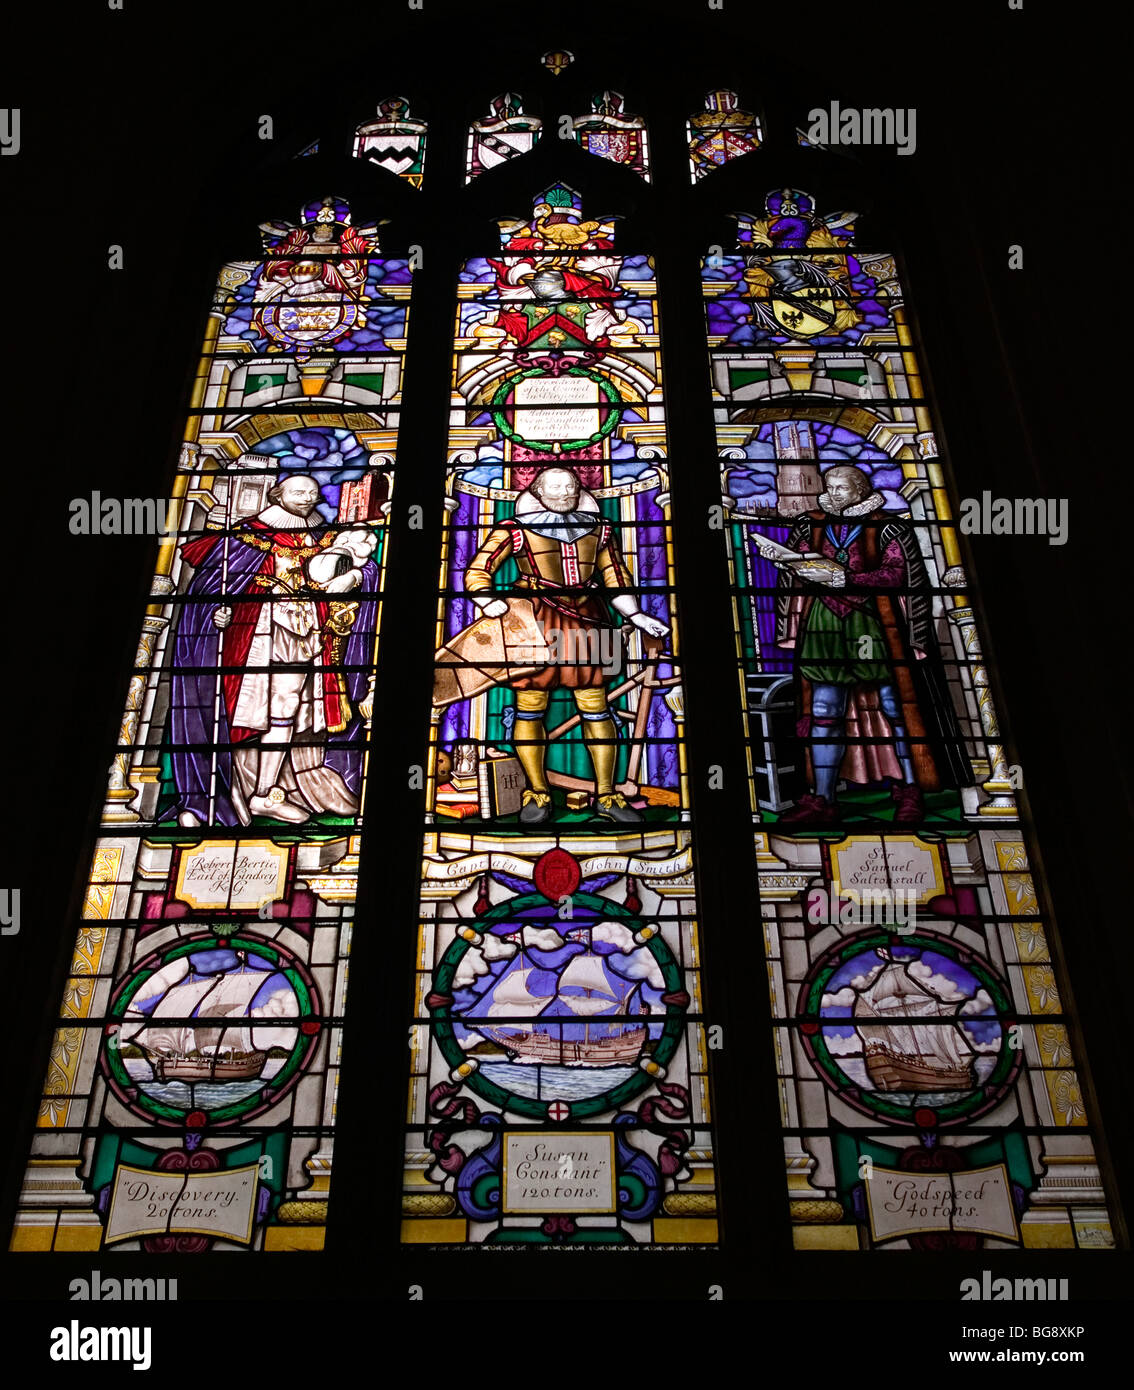 Commemorative stained glass window to Capt. John Smith and the Jamestown endeavour., in St Sepulchre-without-Newgate church Stock Photo